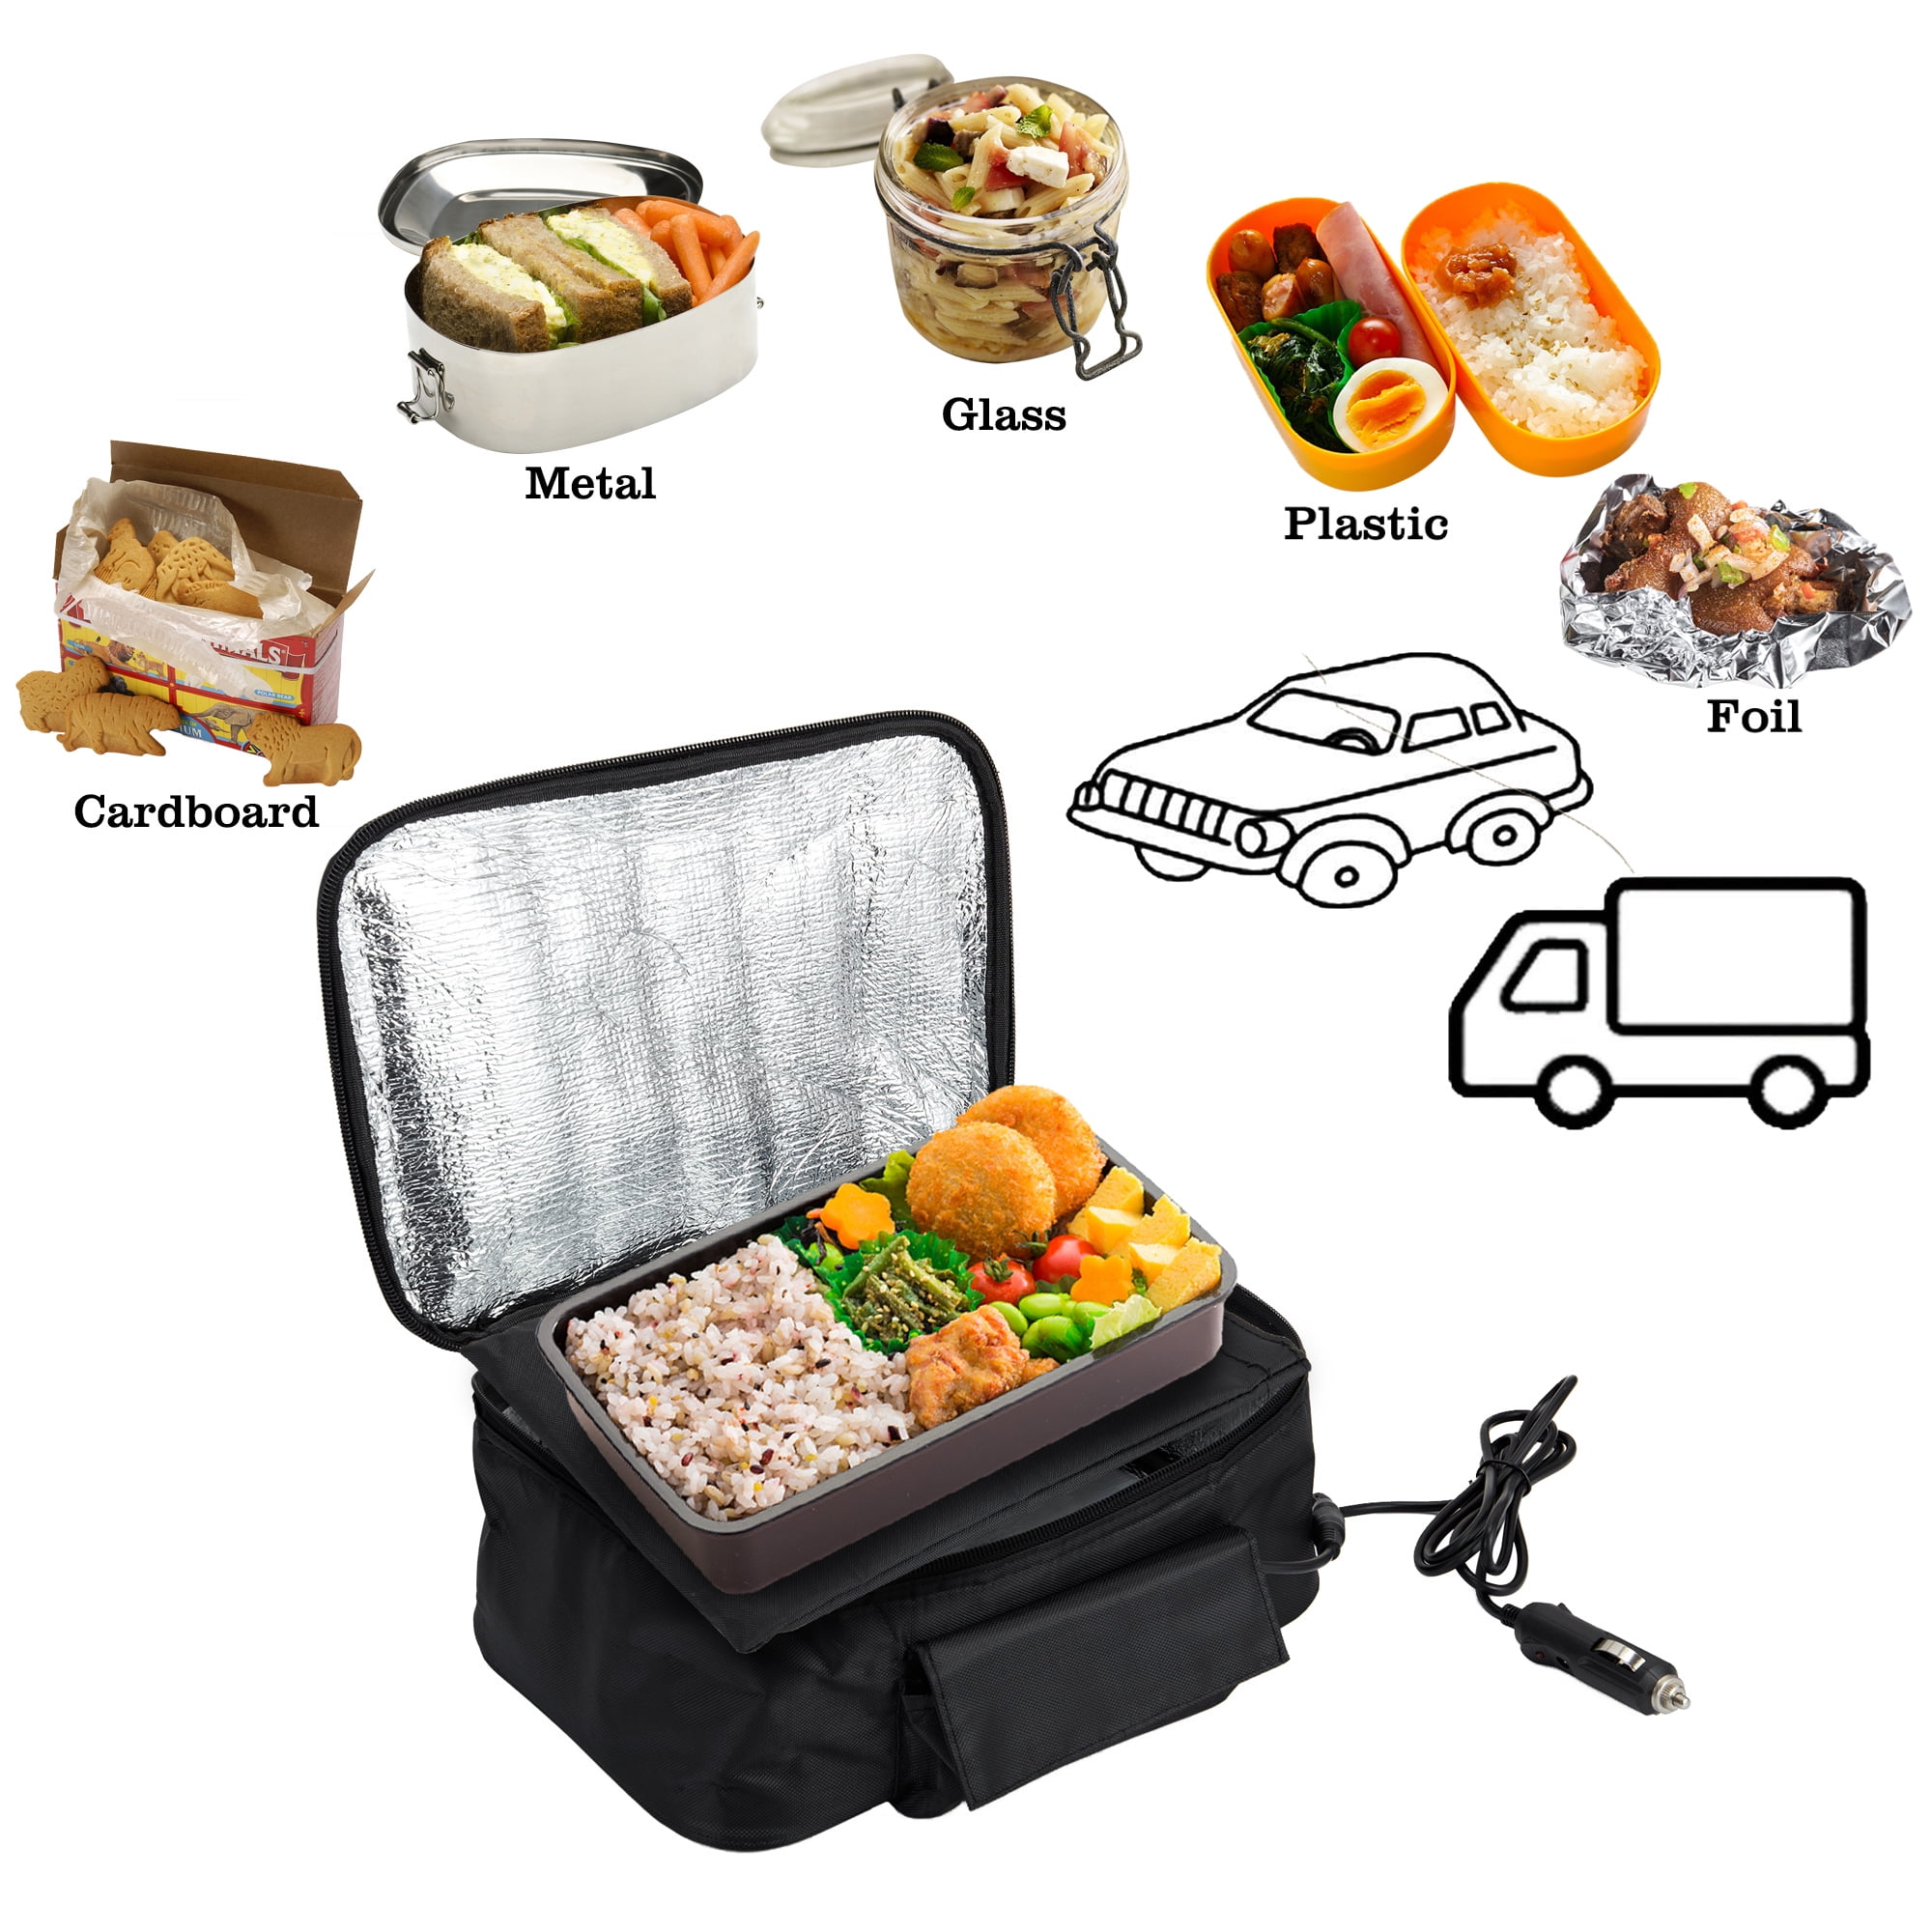 Microwavable Lunch Box - Keep Your Lunch Warm On-The-Go